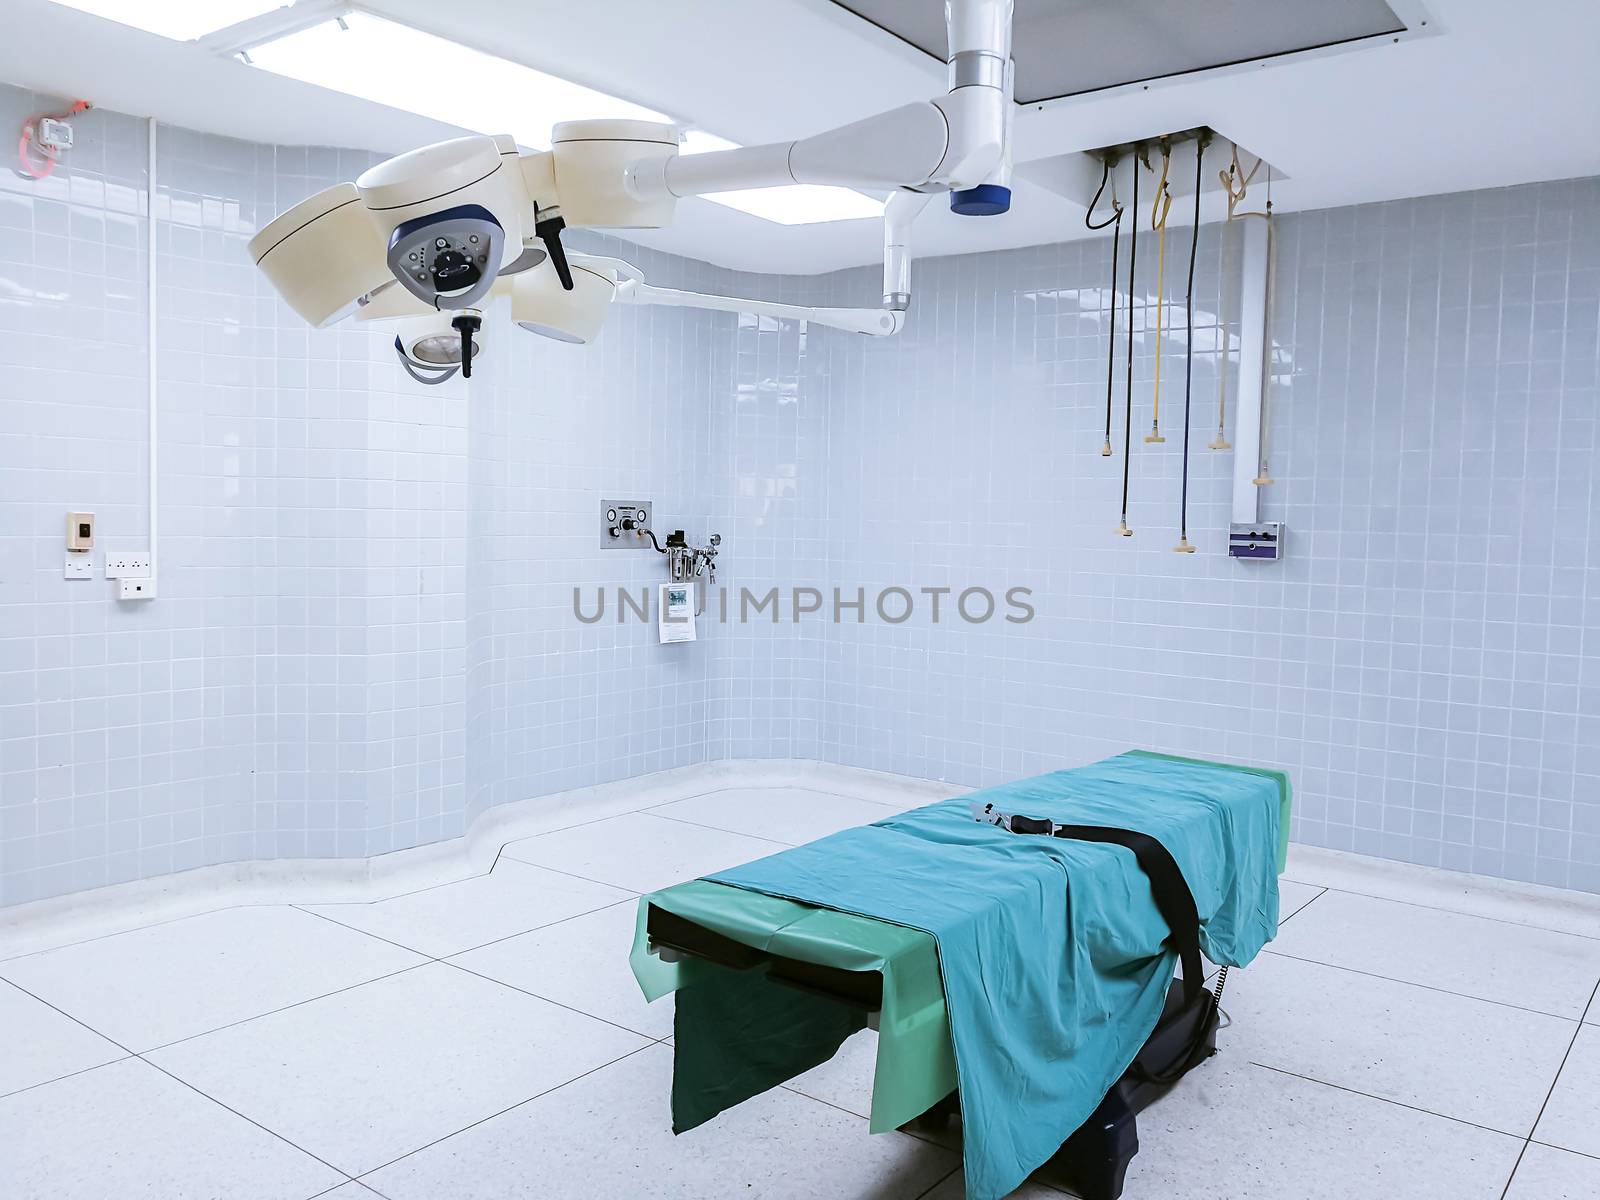 Light illuminated in Surgery Operating room in hospital by sompongtom